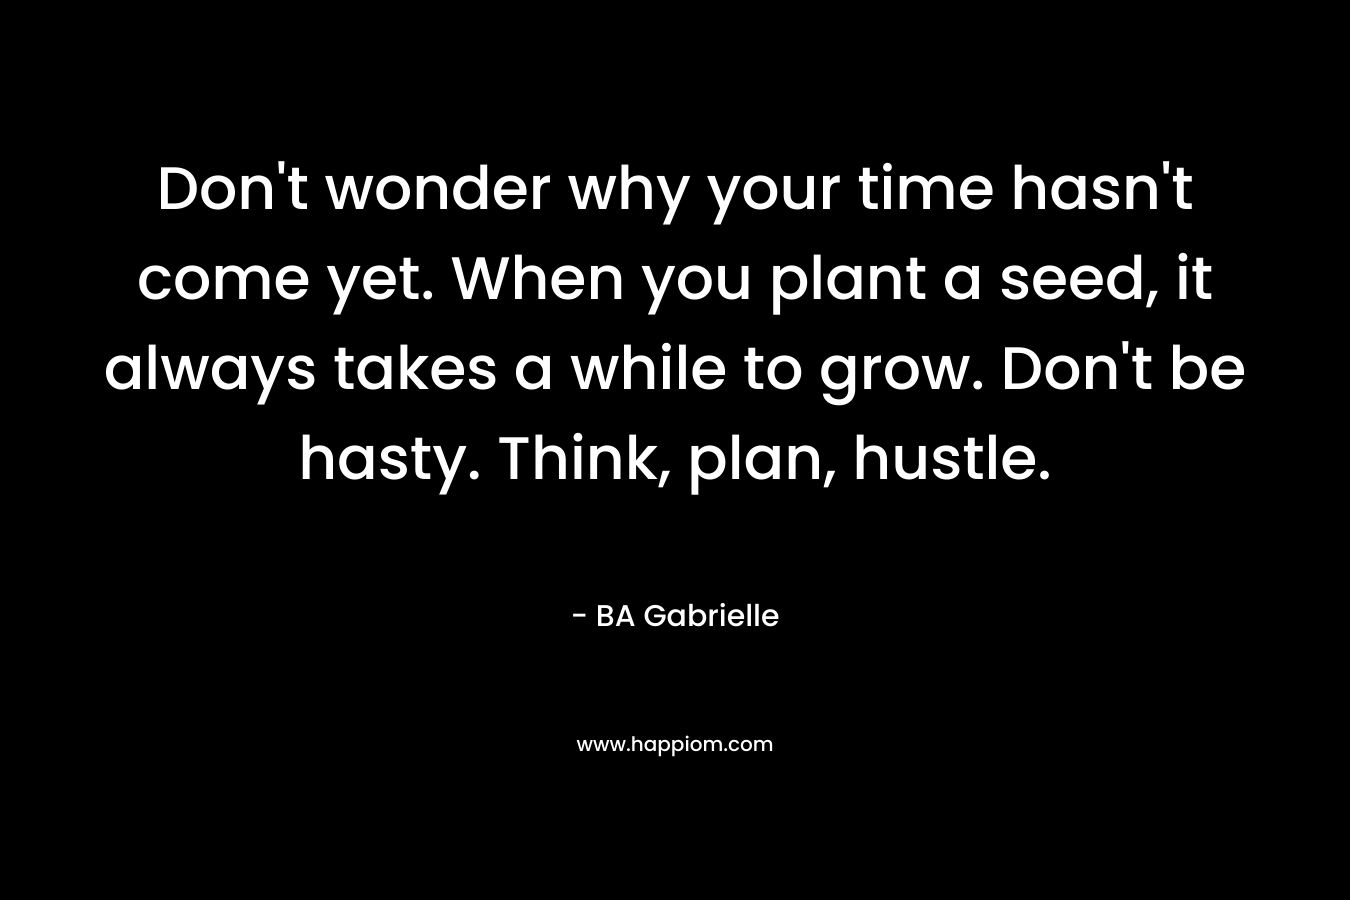 Don’t wonder why your time hasn’t come yet. When you plant a seed, it always takes a while to grow. Don’t be hasty. Think, plan, hustle. – BA Gabrielle